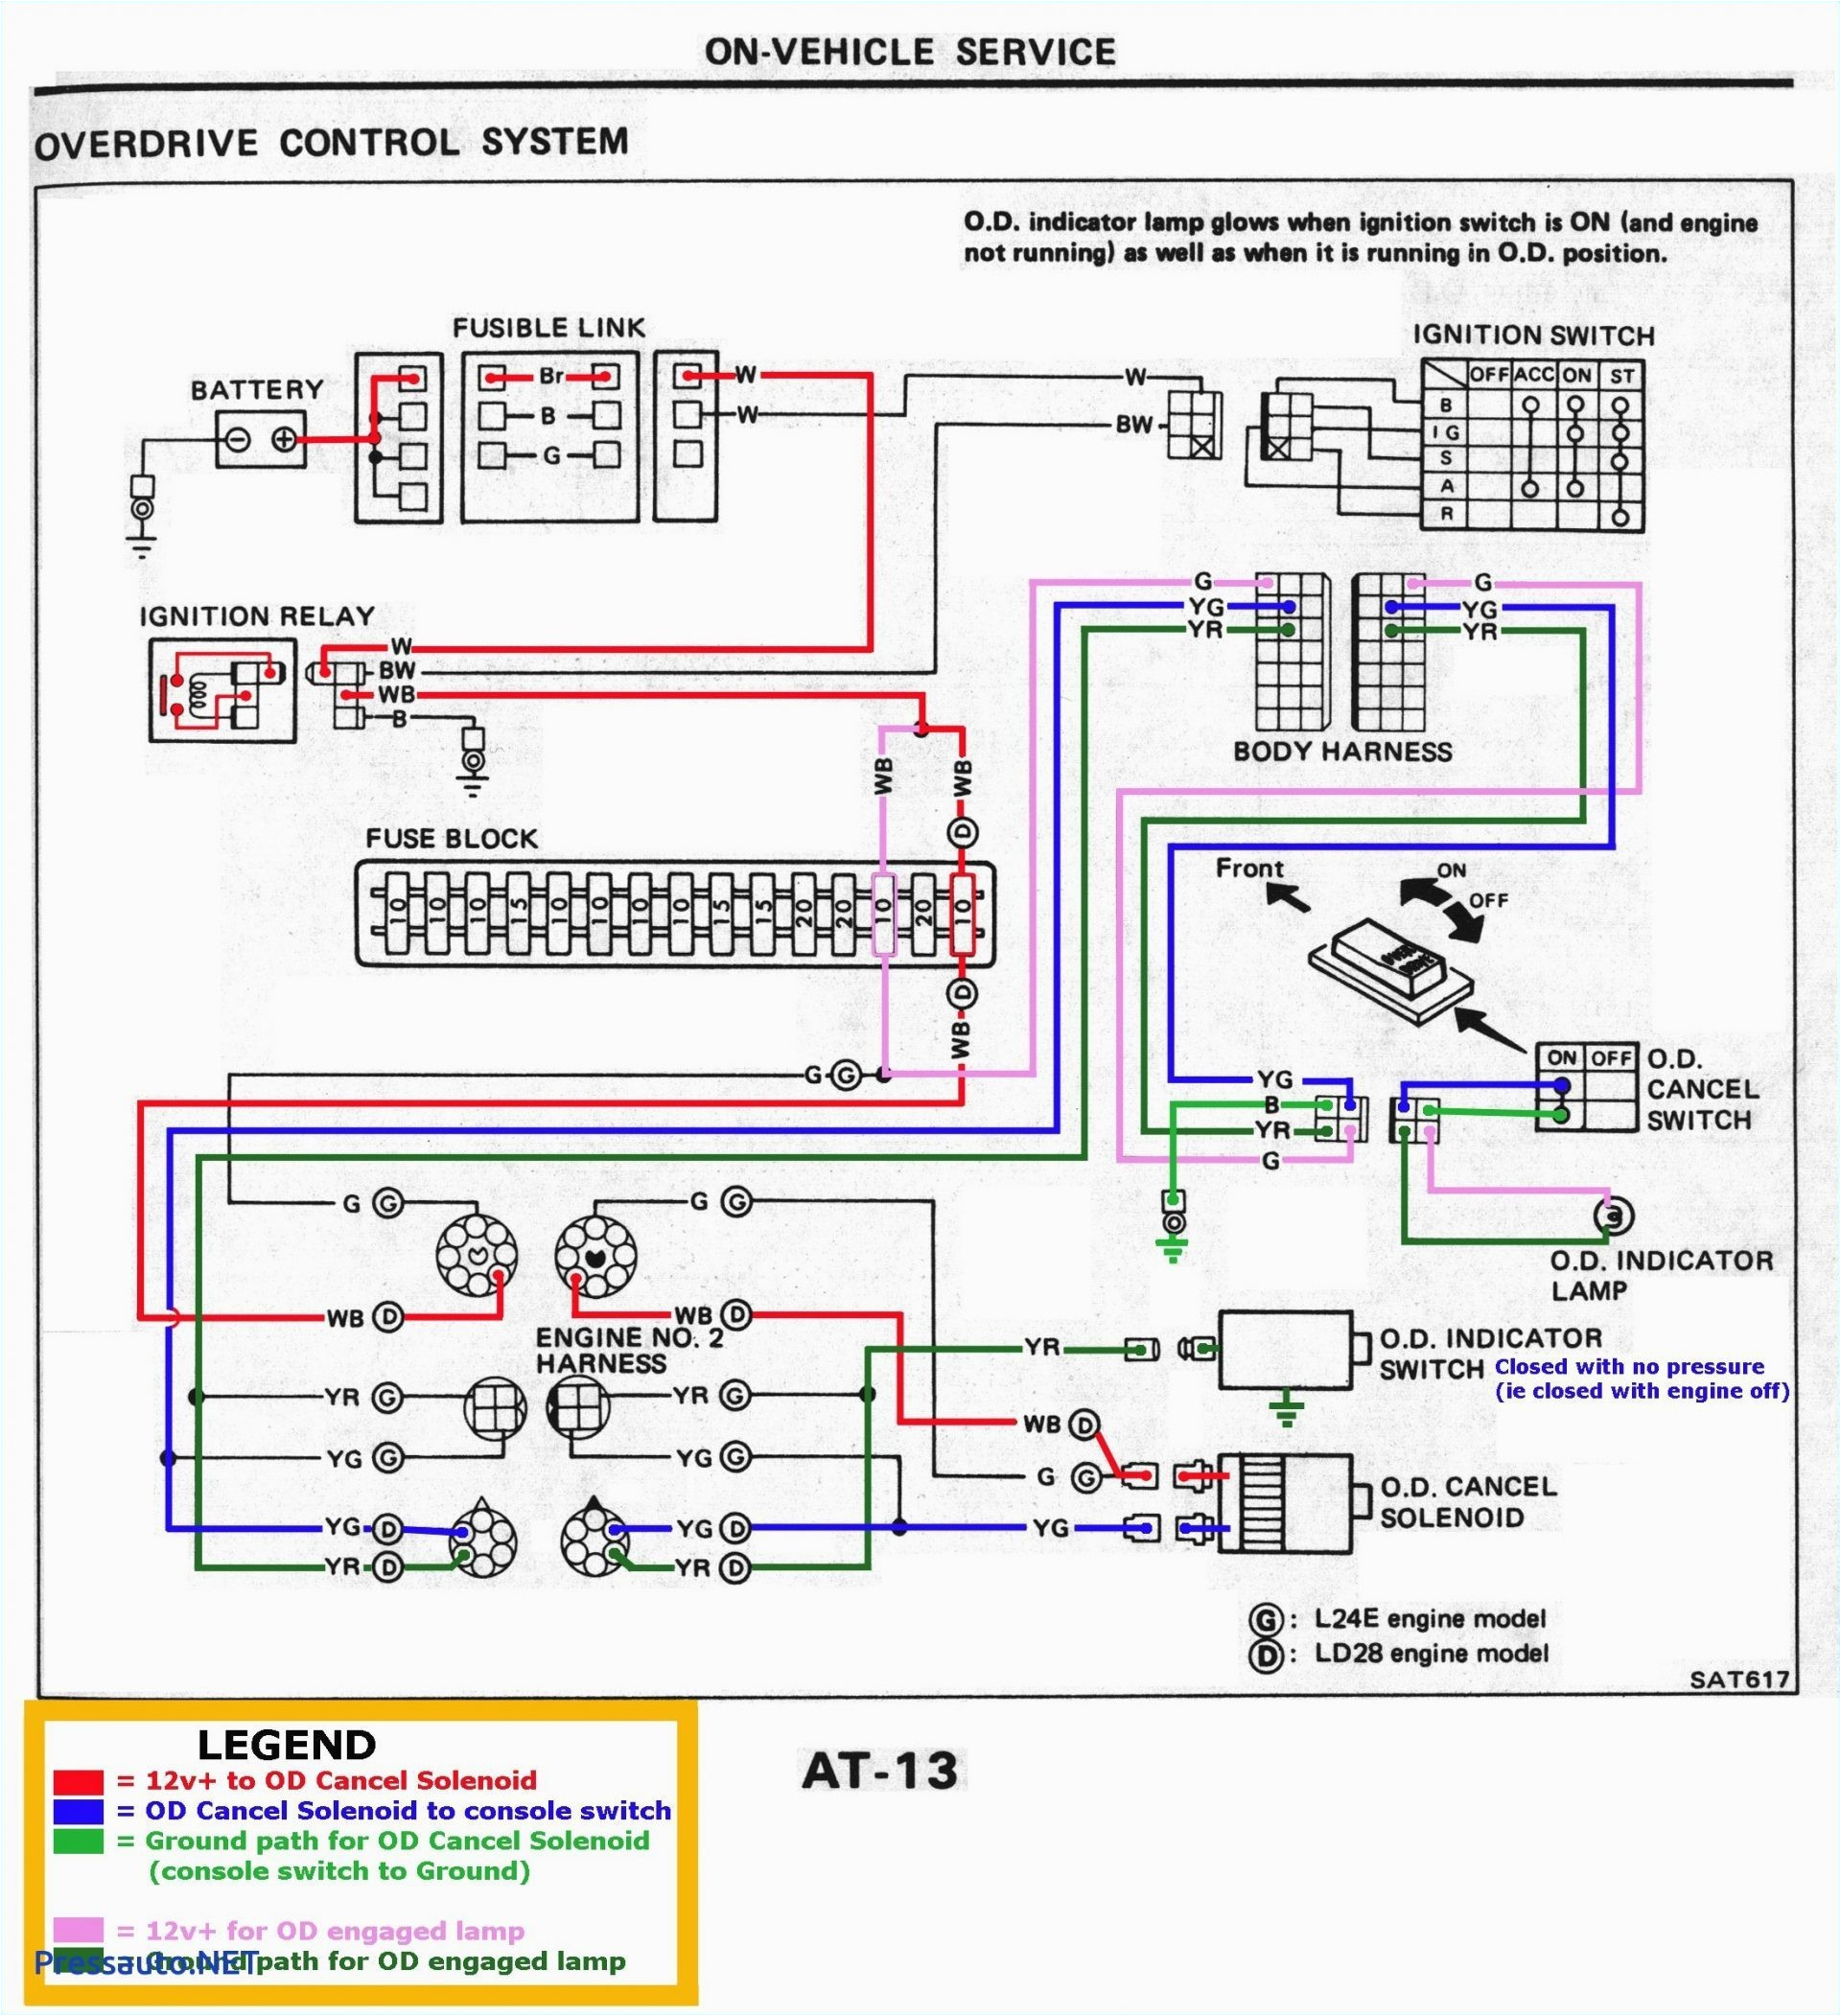 220 plug wiring diagram awesome wiring diagram for 220 volt generator plug fresh wiring diagram for